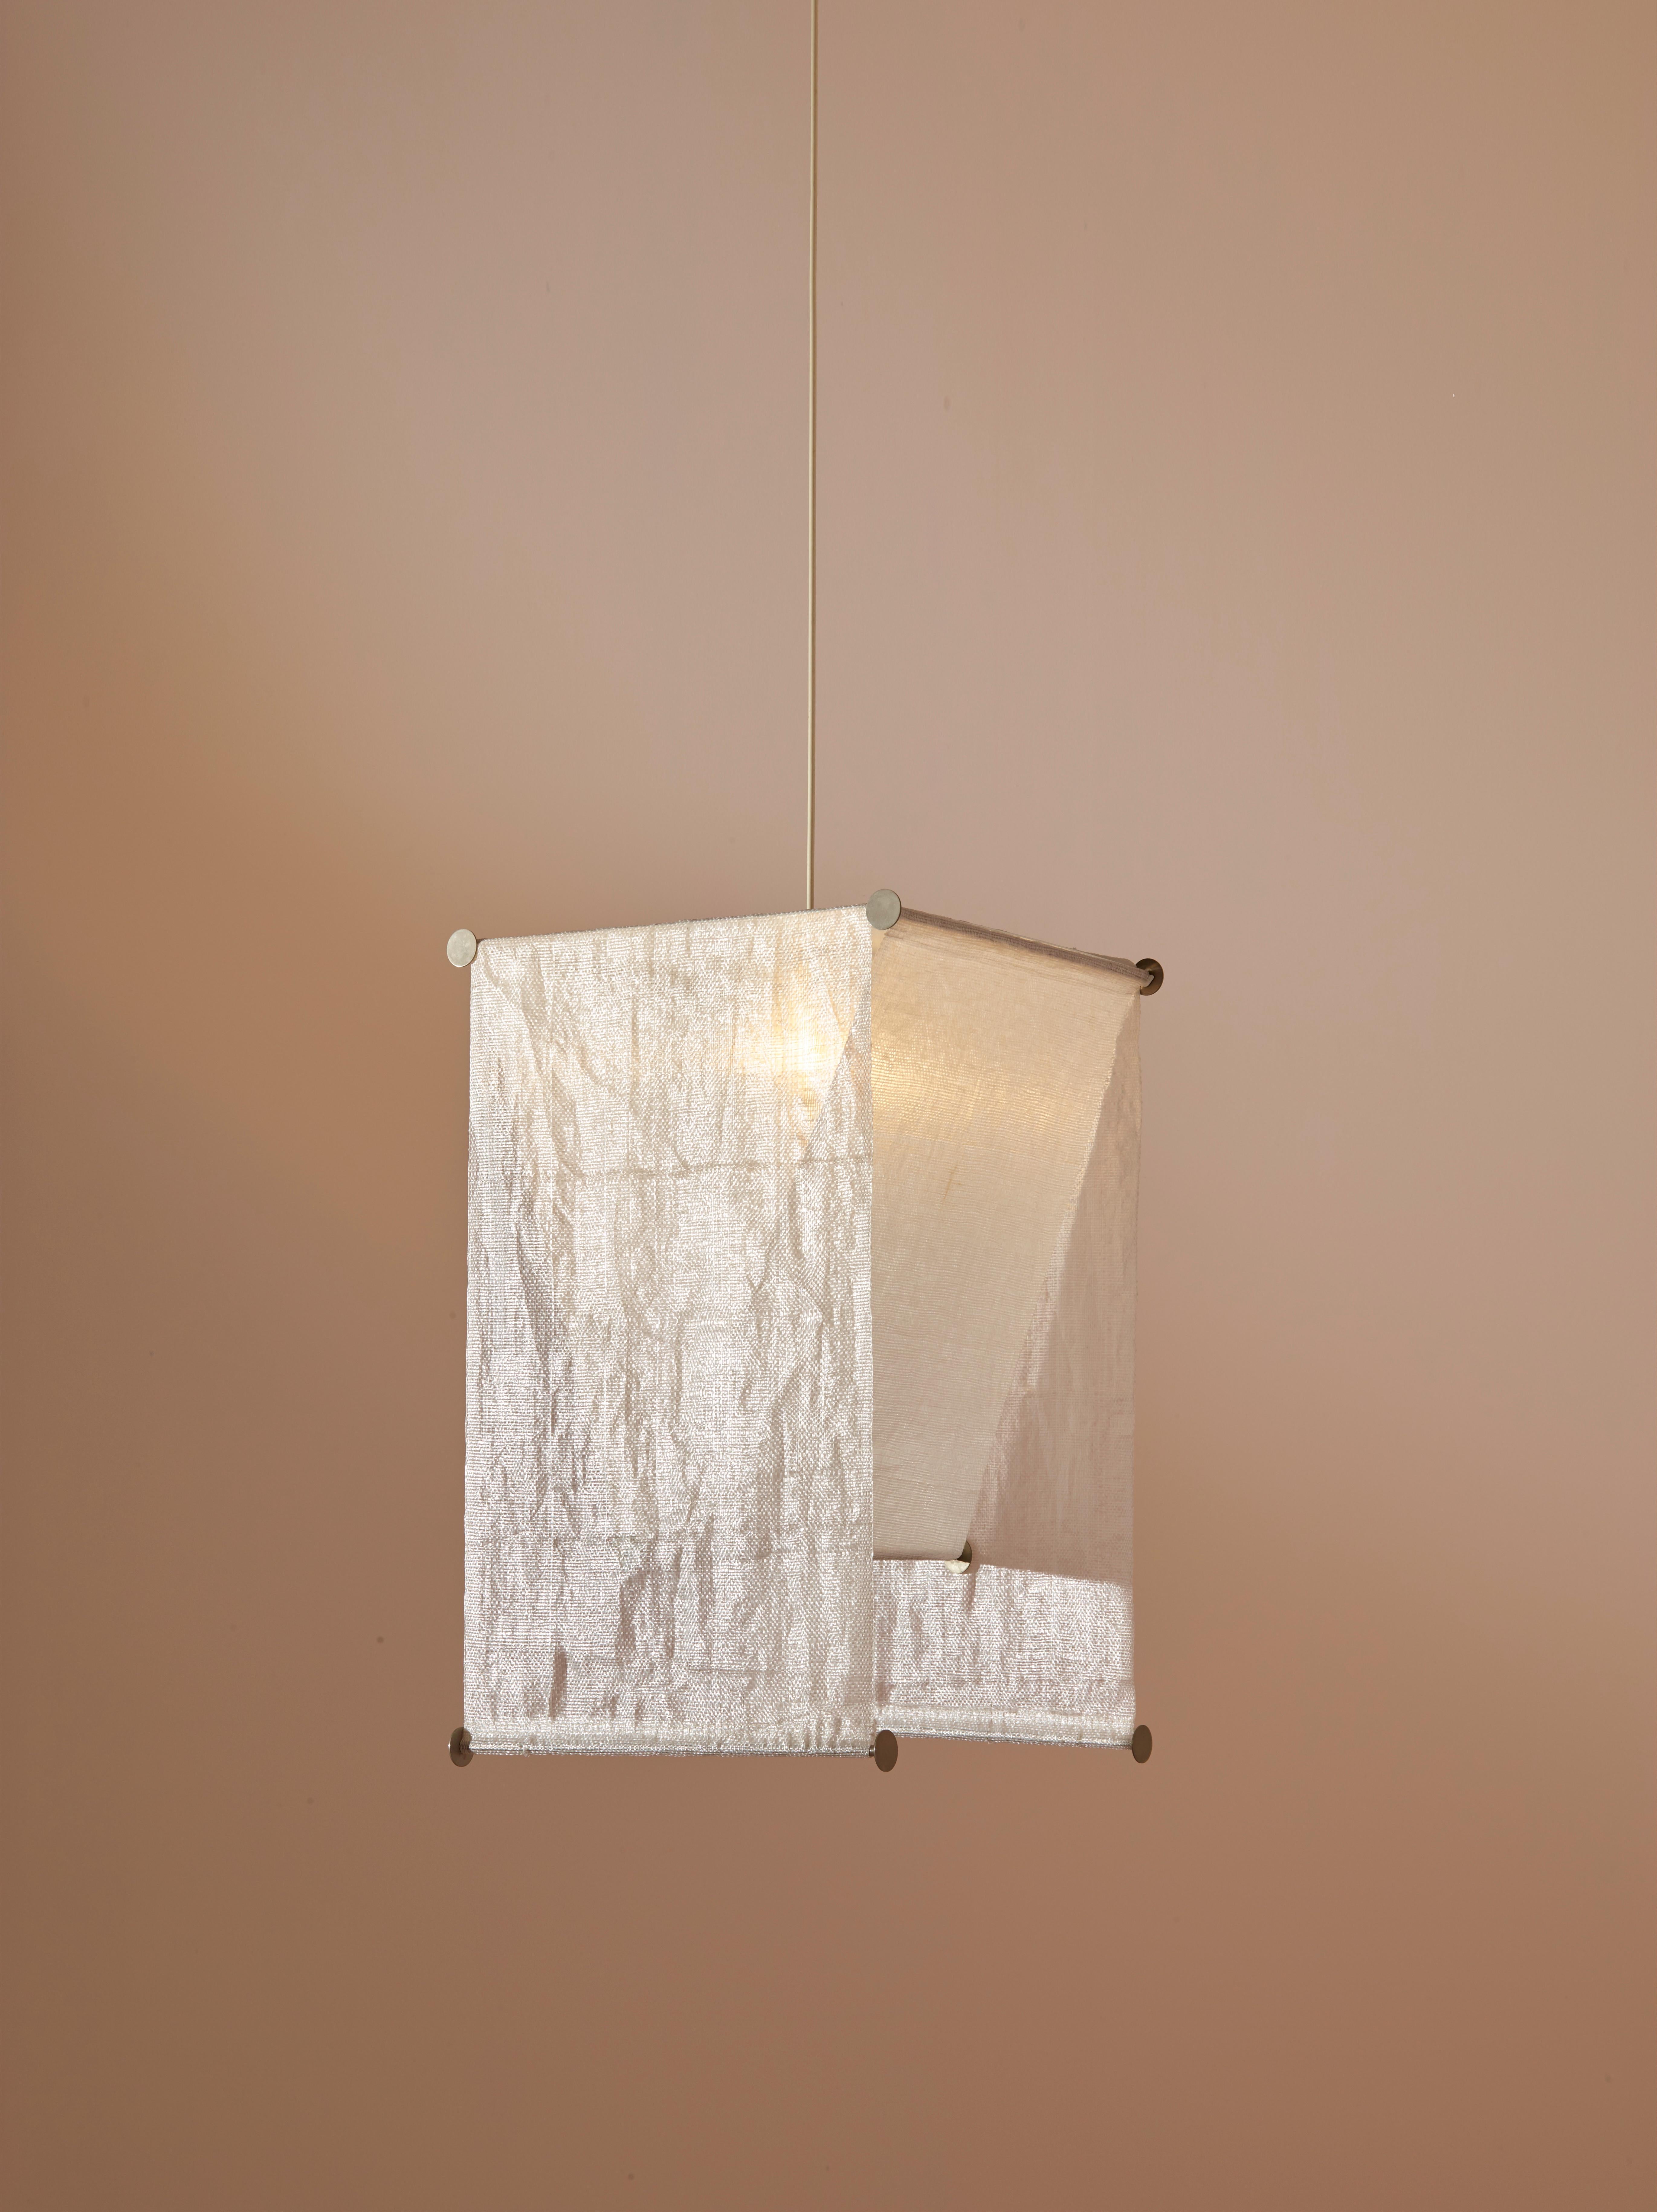 Teli KD51/R Hanging Lamp by Achille and Pier Giacomo Castiglioni for Flos, 1973 1